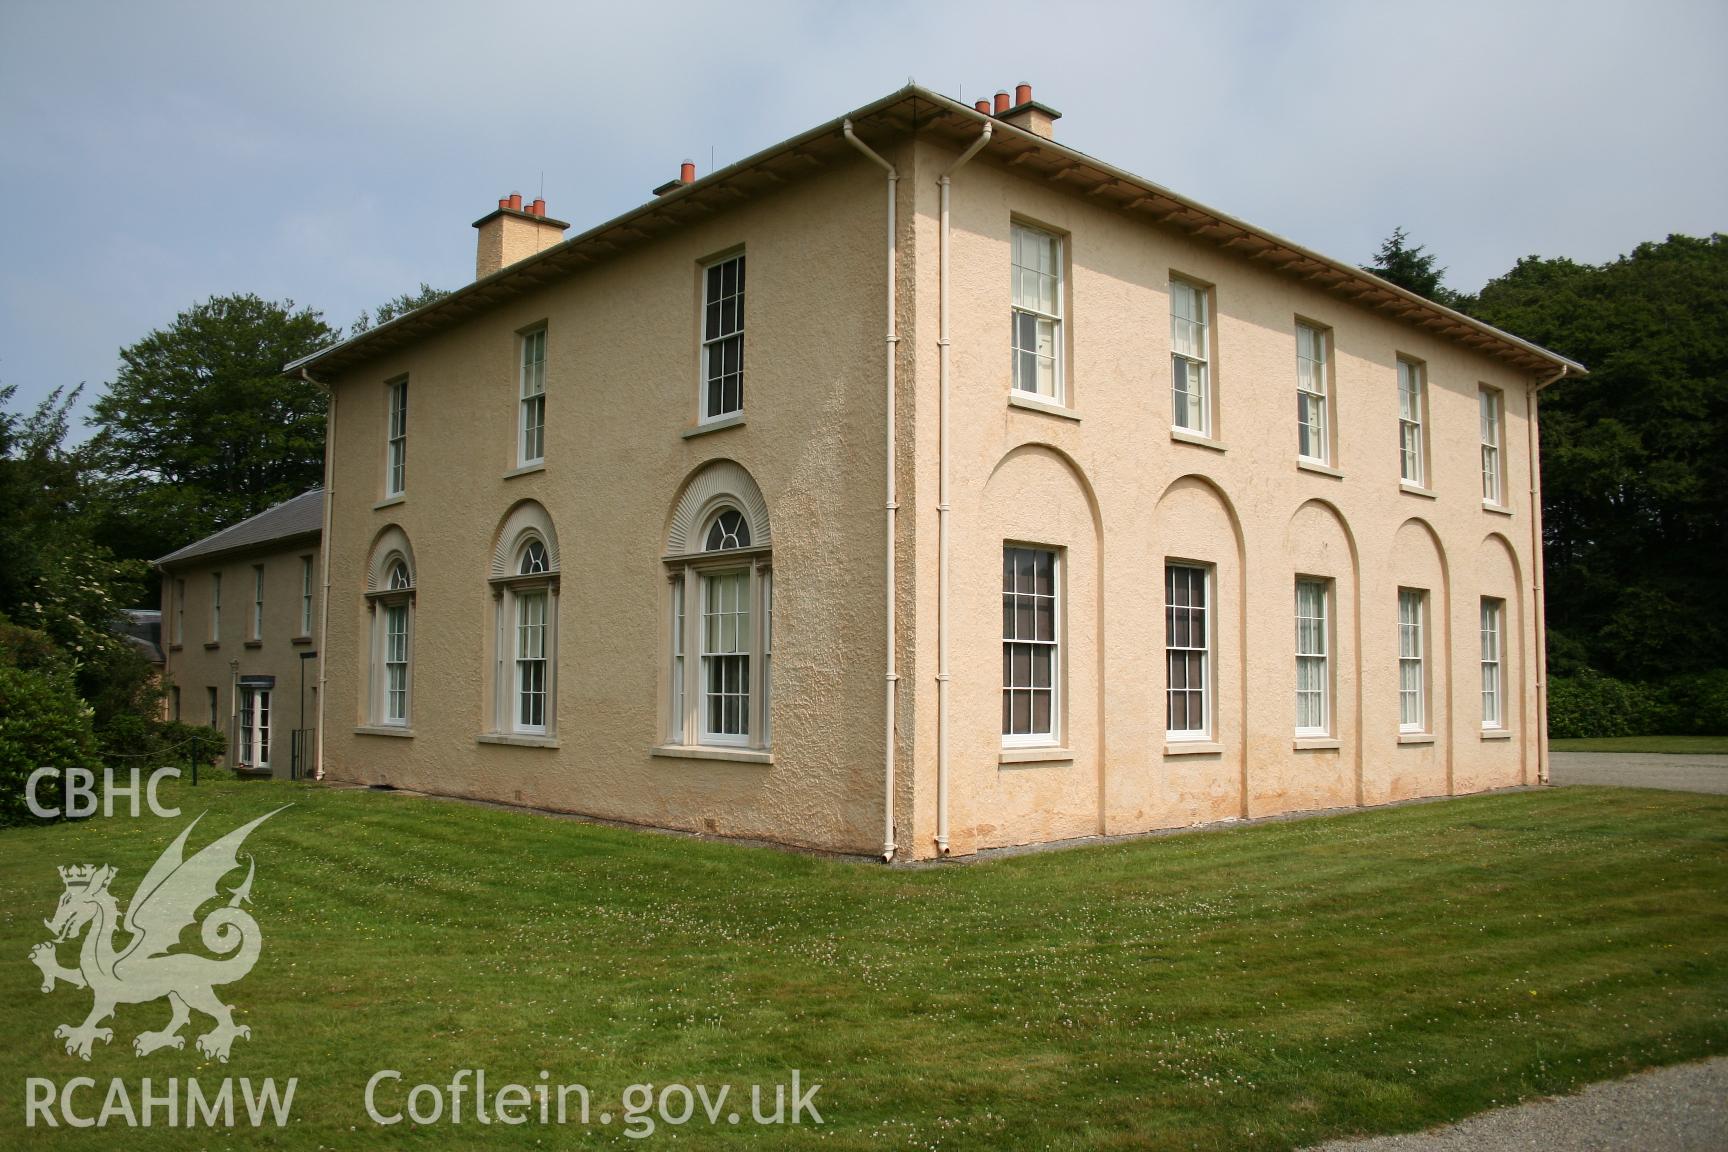 View of Llanaeron House from the west, taken by Brian Malaws on 01 July 2006.